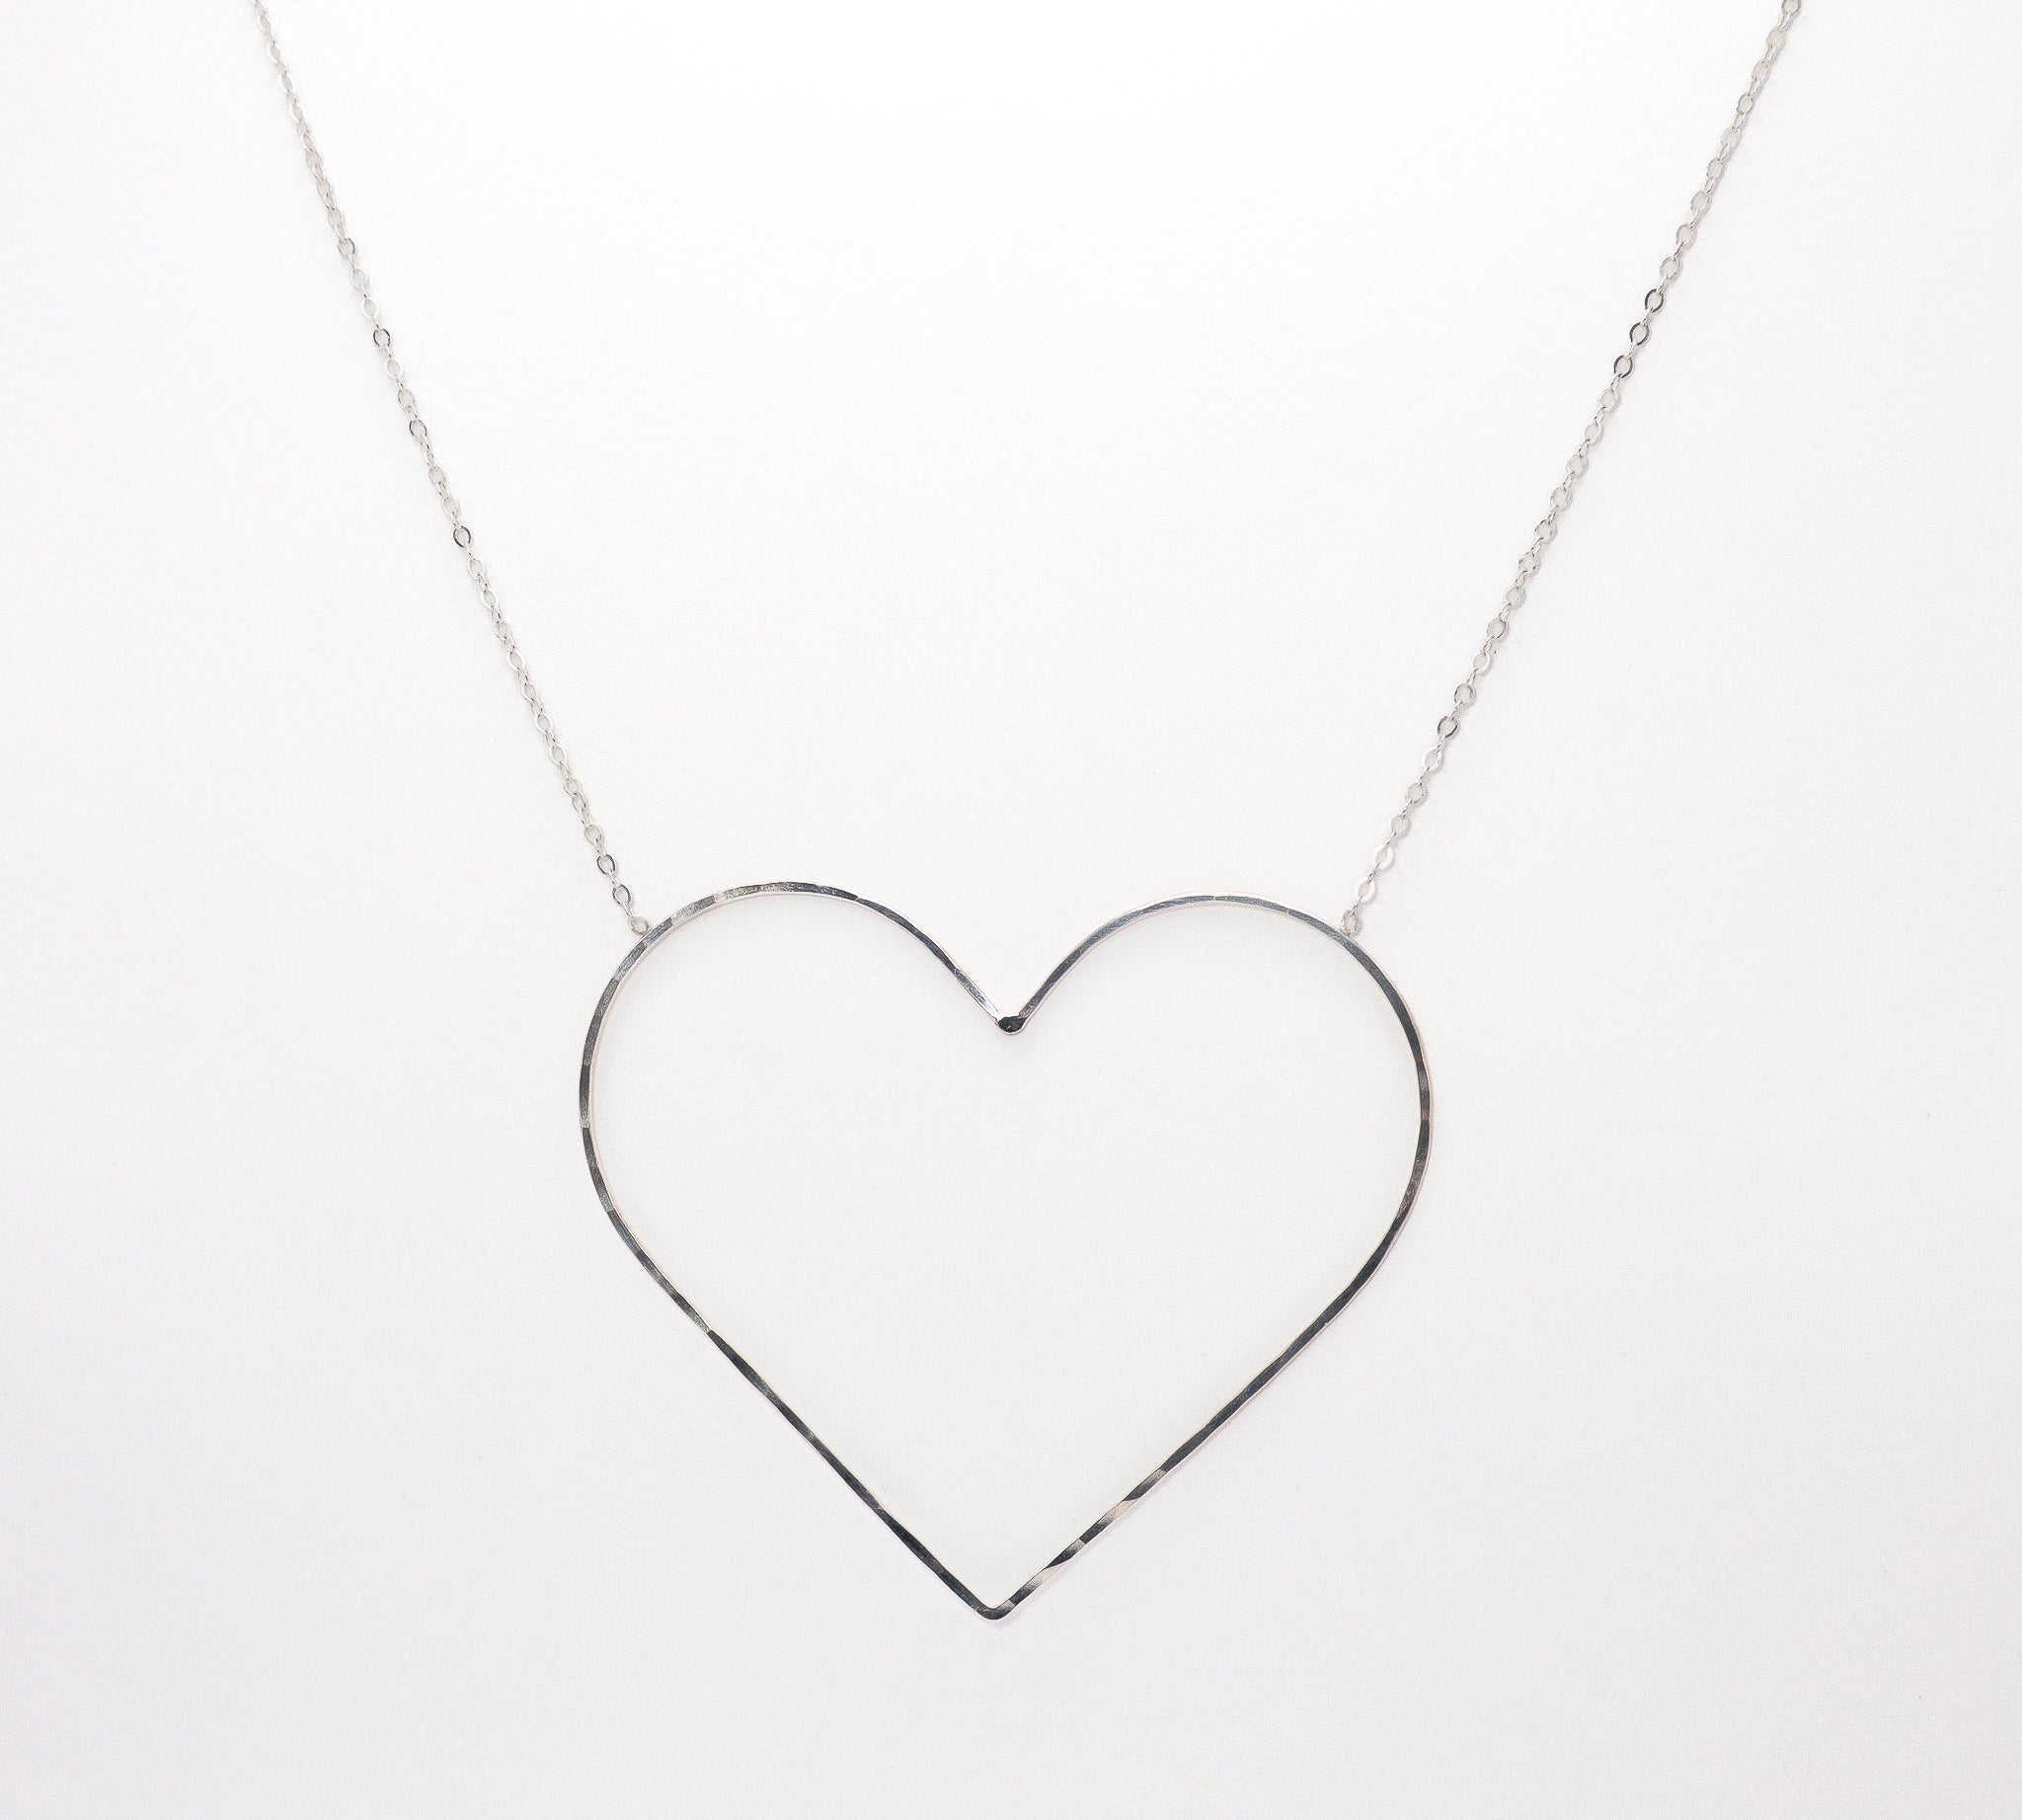 Silver Lining Necklace, featured image